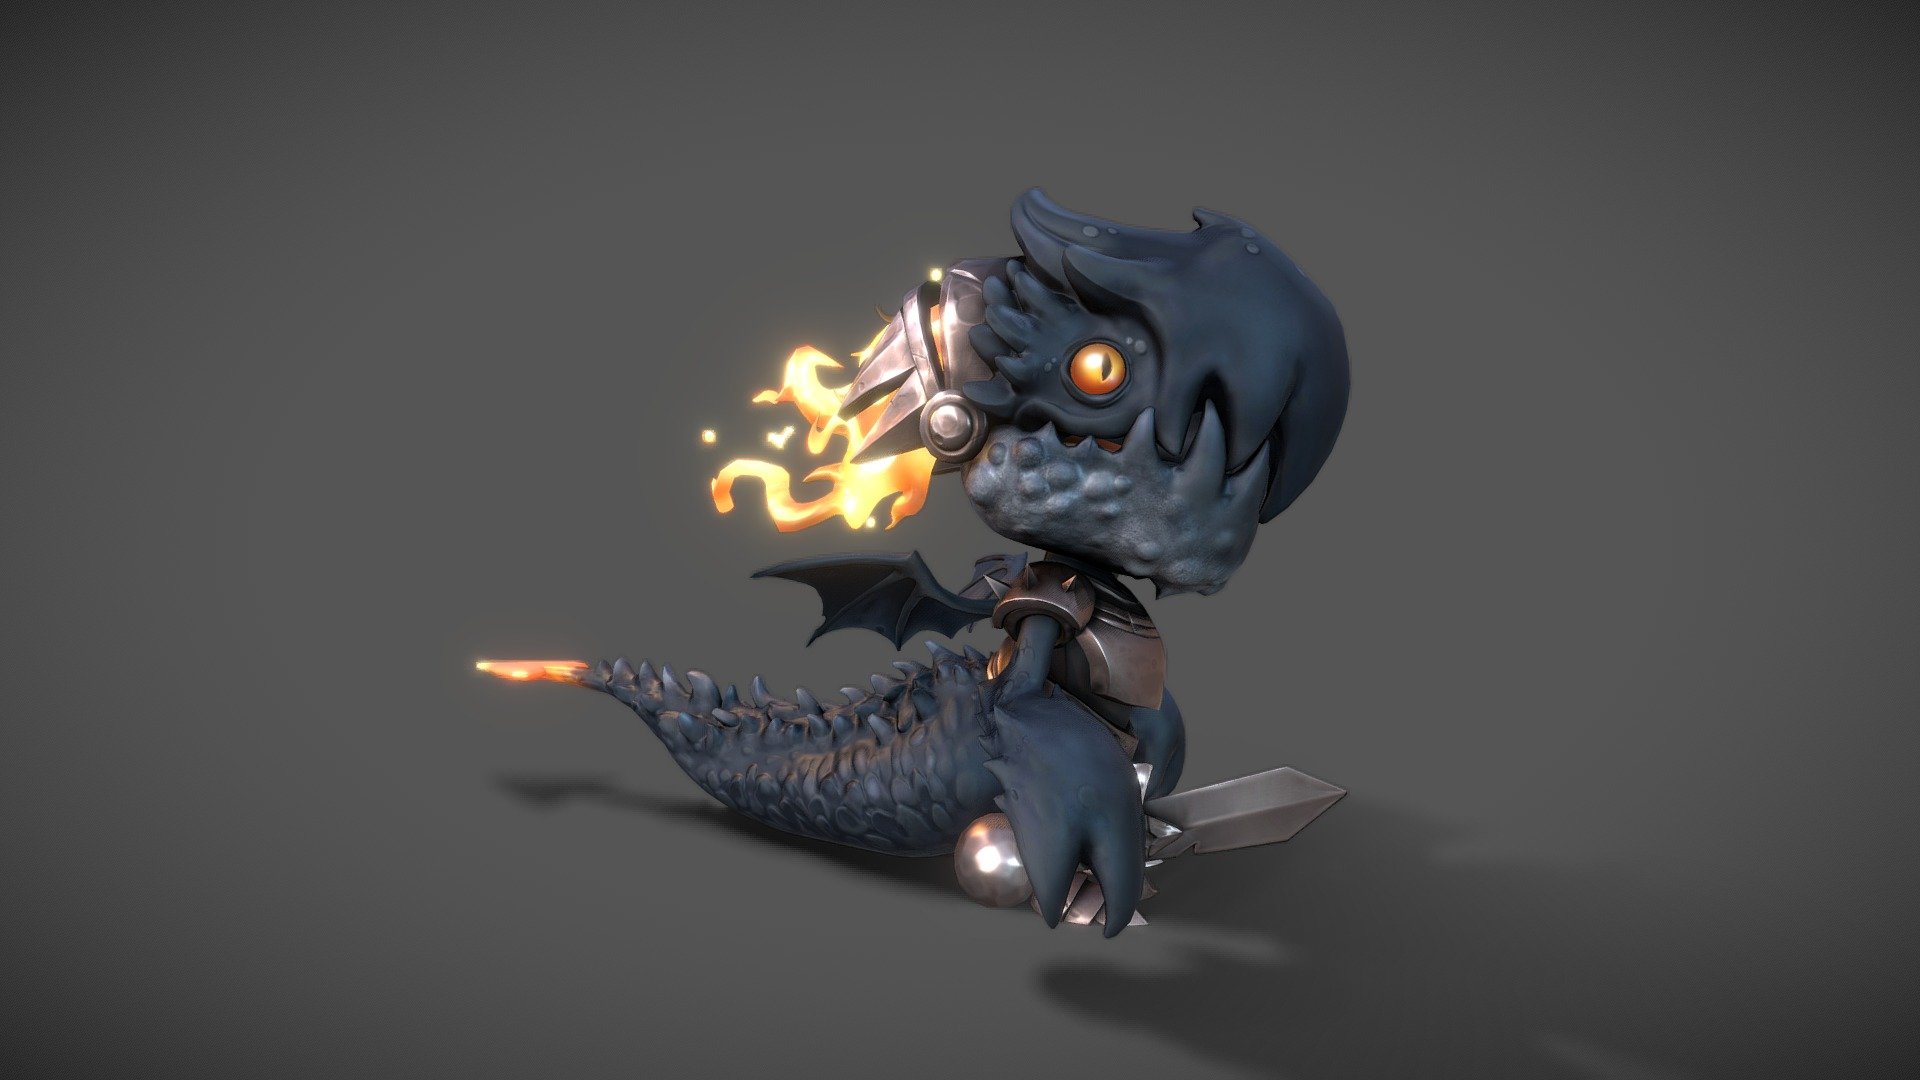 A little dragon made with the help of Éva Kárpáti's concept art : ) it was fun to do
Link of the concept art: https://www.artstation.com/artwork/DxvPEE
Link of my artstation page: https://www.artstation.com/nyhm - Tiny Dragon - 3D model by Nyhm 3d model